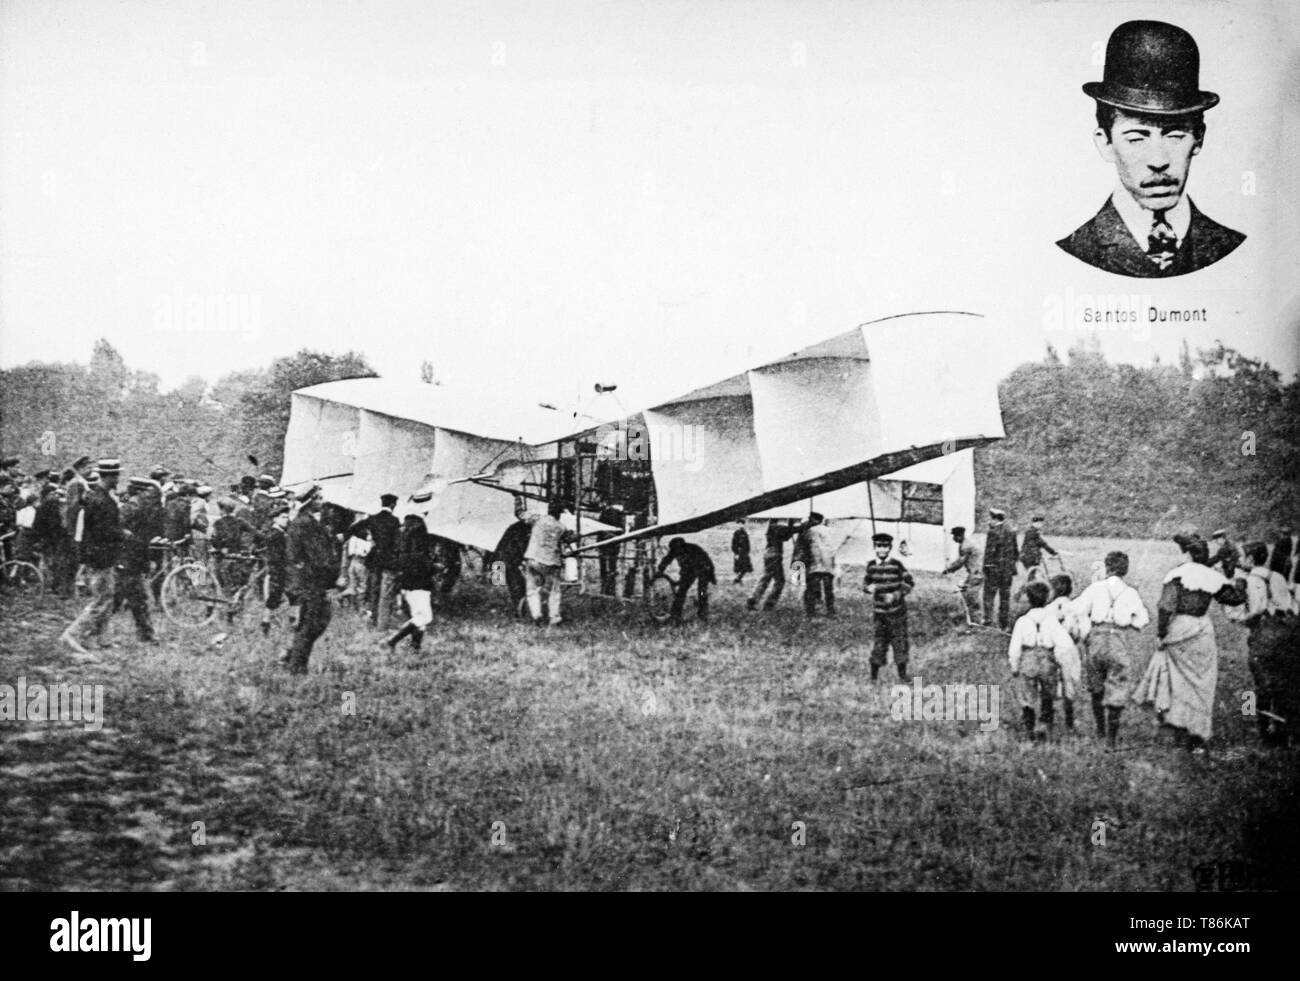 The 14 bis canard biplane aeroplane, made and flown by Albert Santos Dumont in France in 1906. The 14-bis performed the first powered flight made anywhere outside of the United States. Stock Photo